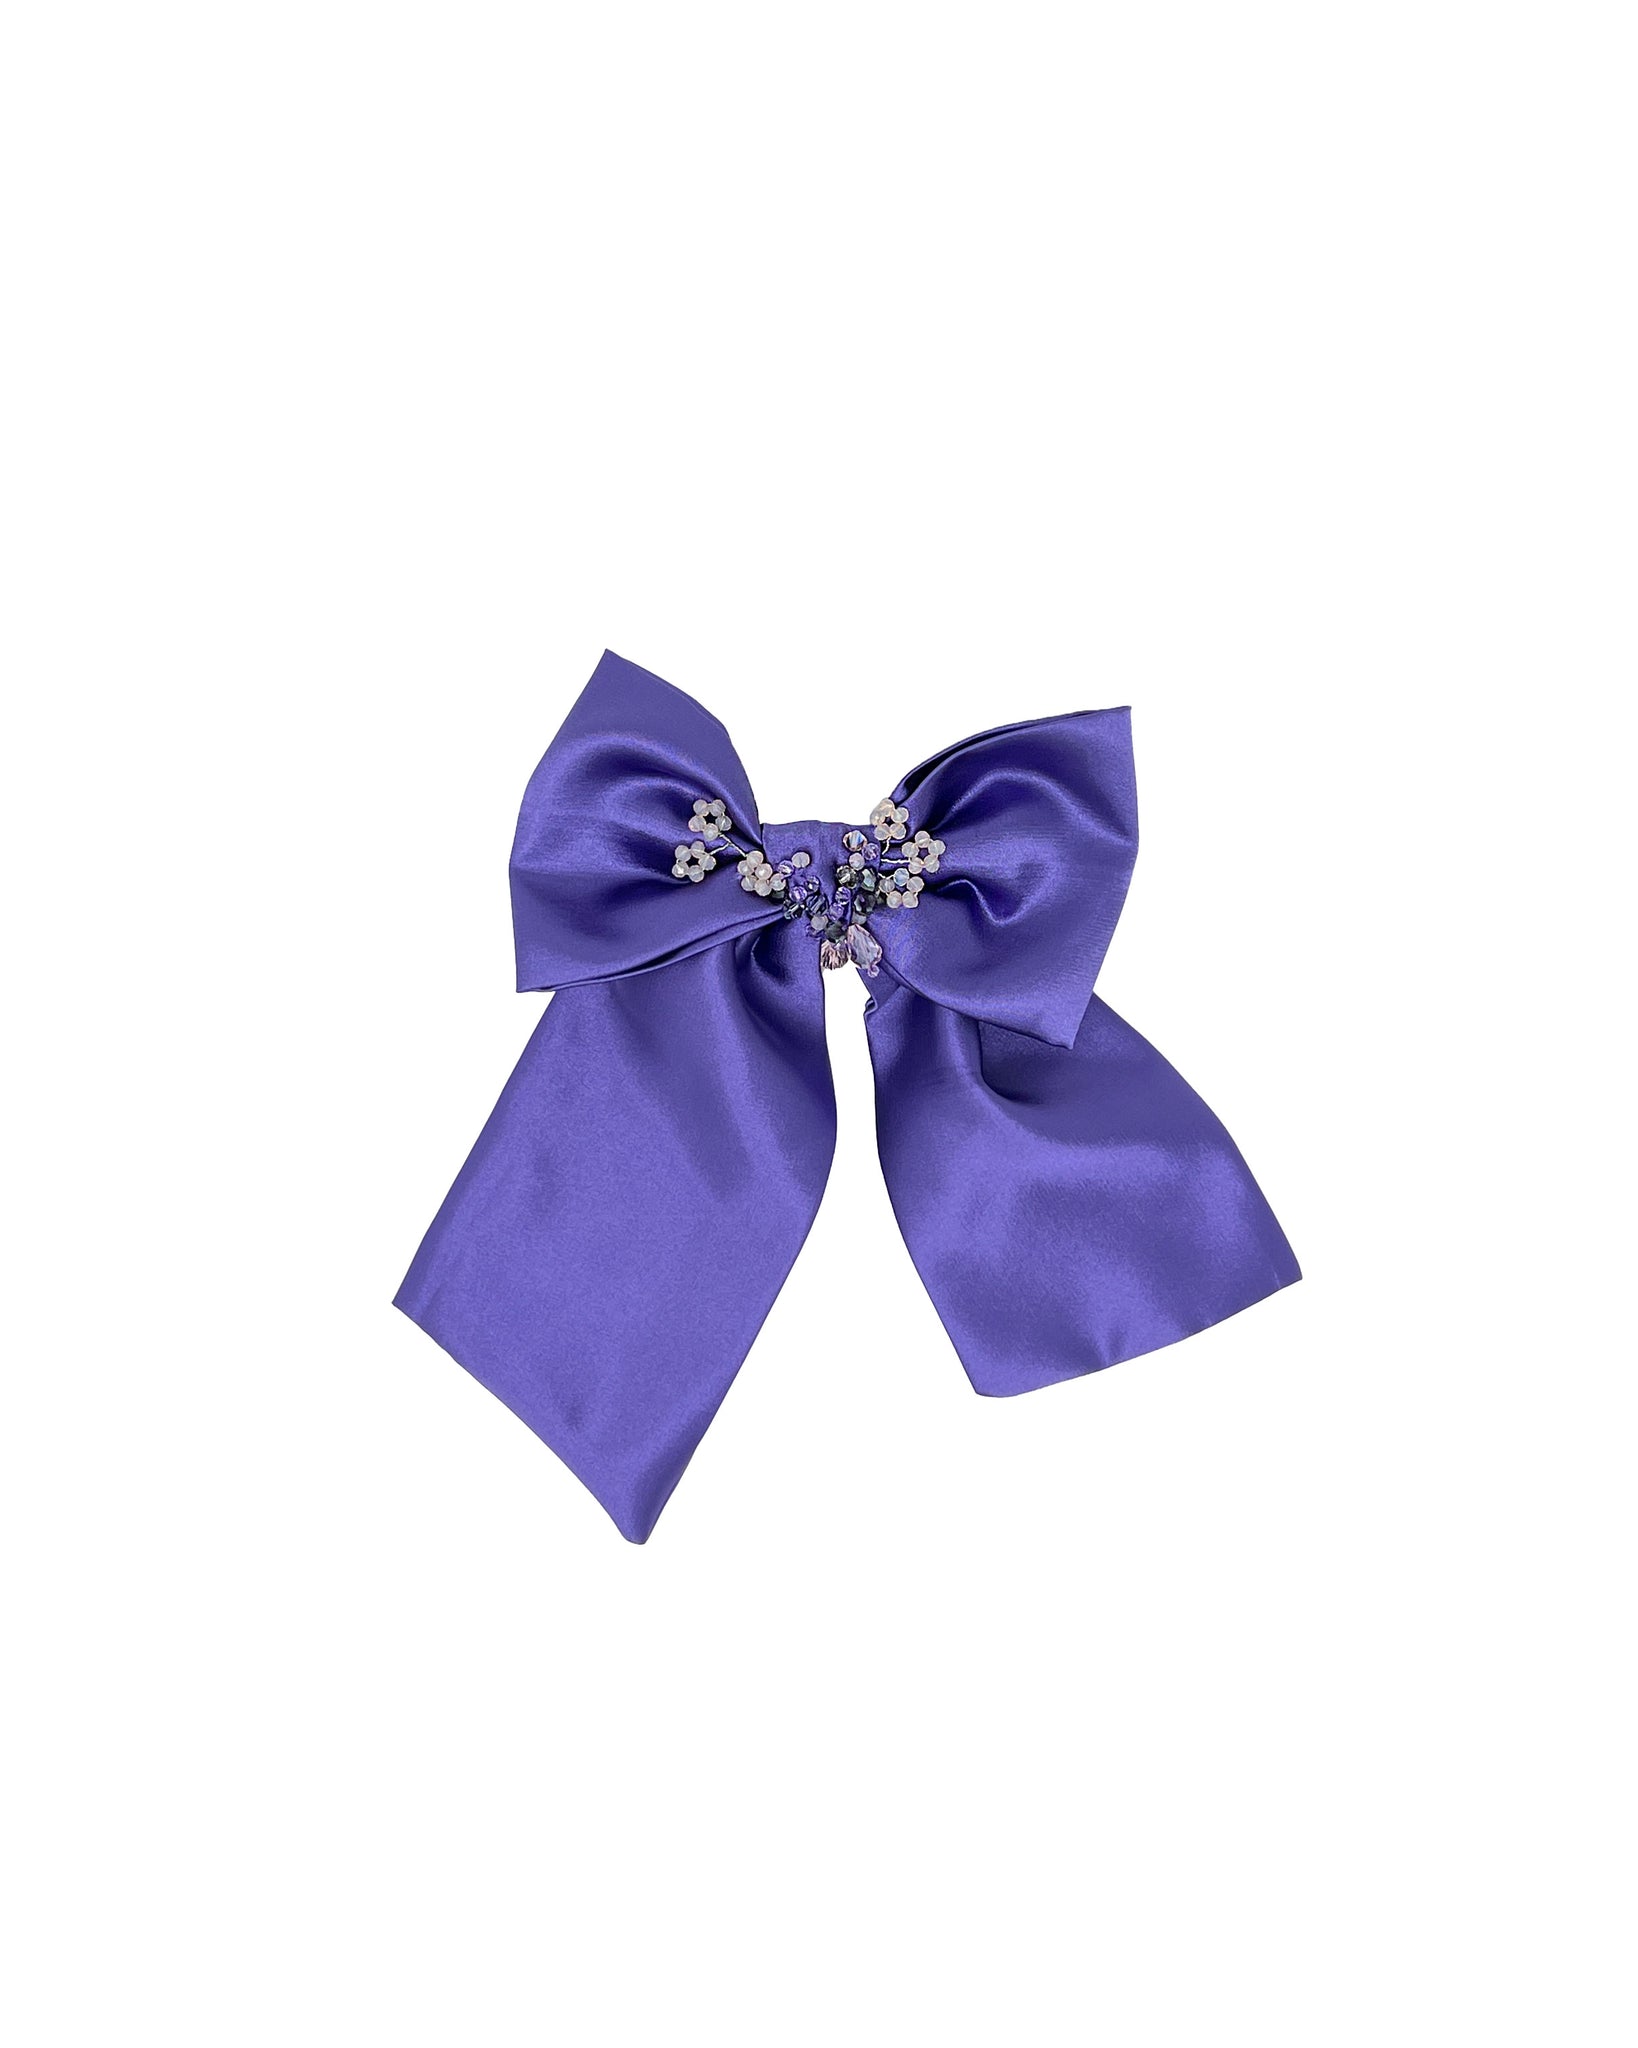 Violet satin bow with crystals flowers